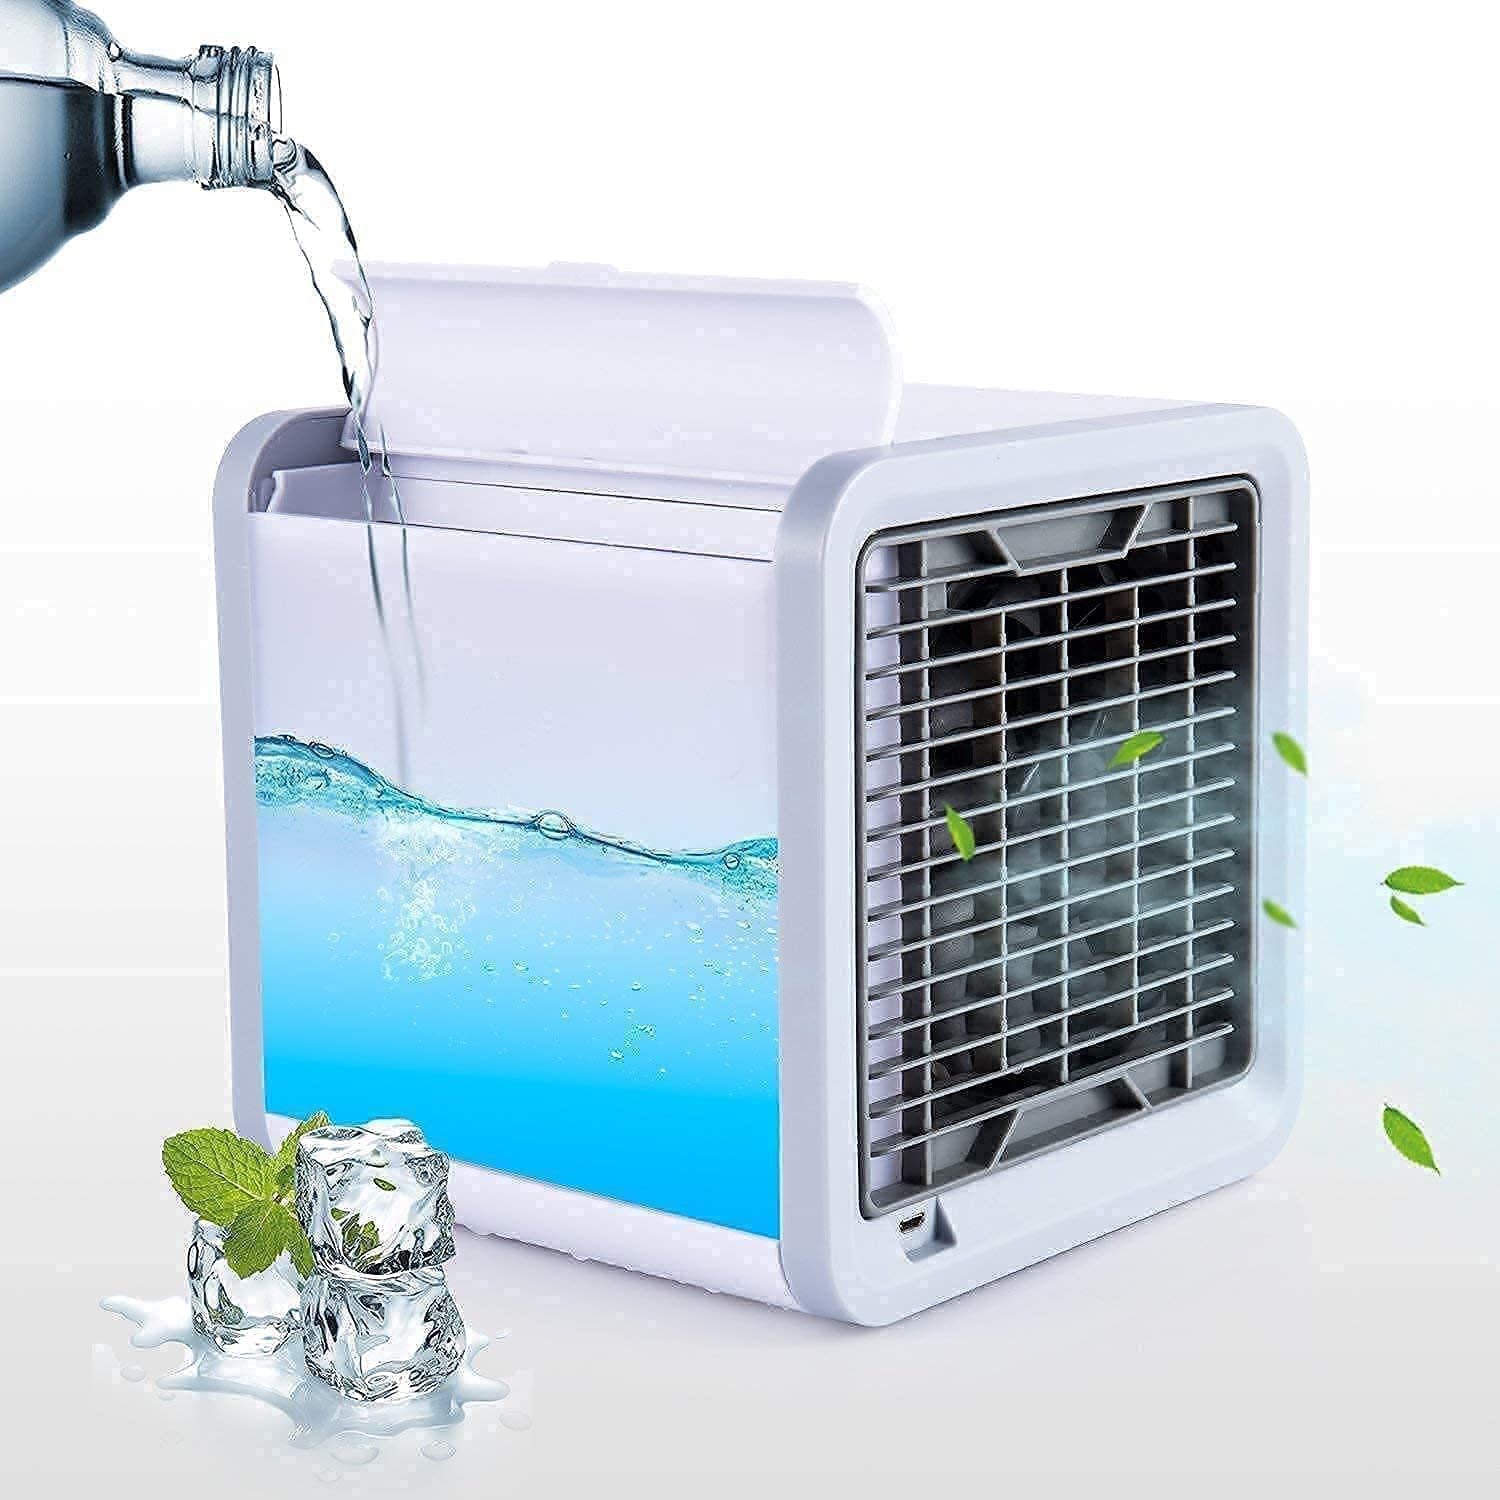 JASH-ENTERPRISE-Mini-cooler-for room-cooling-mini-cooler-ac-portable-air-conditiioners-for Home-Office-Artic-Cooler-3-In-1